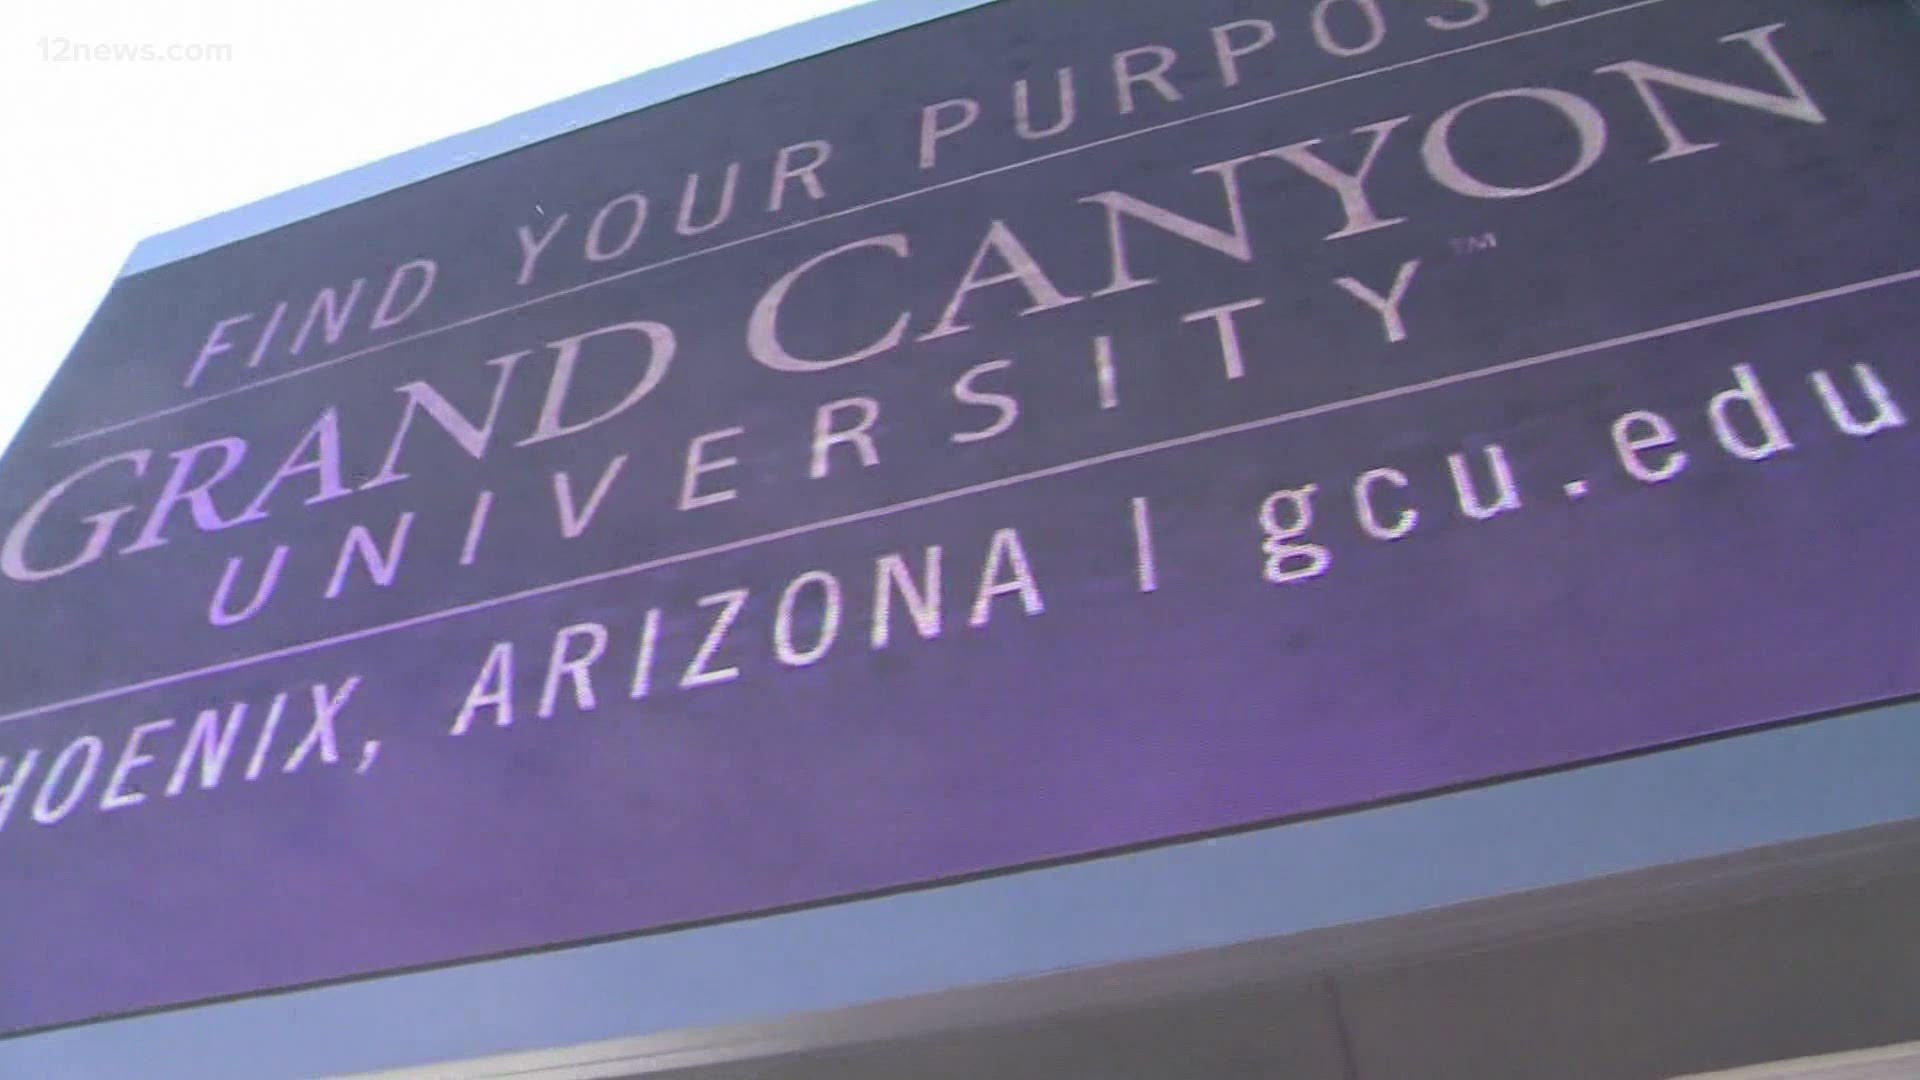 As Arizona works to vaccinate more people to slow the spread of COVID-19, Grand Canyon University opened a vaccination site on its campus.